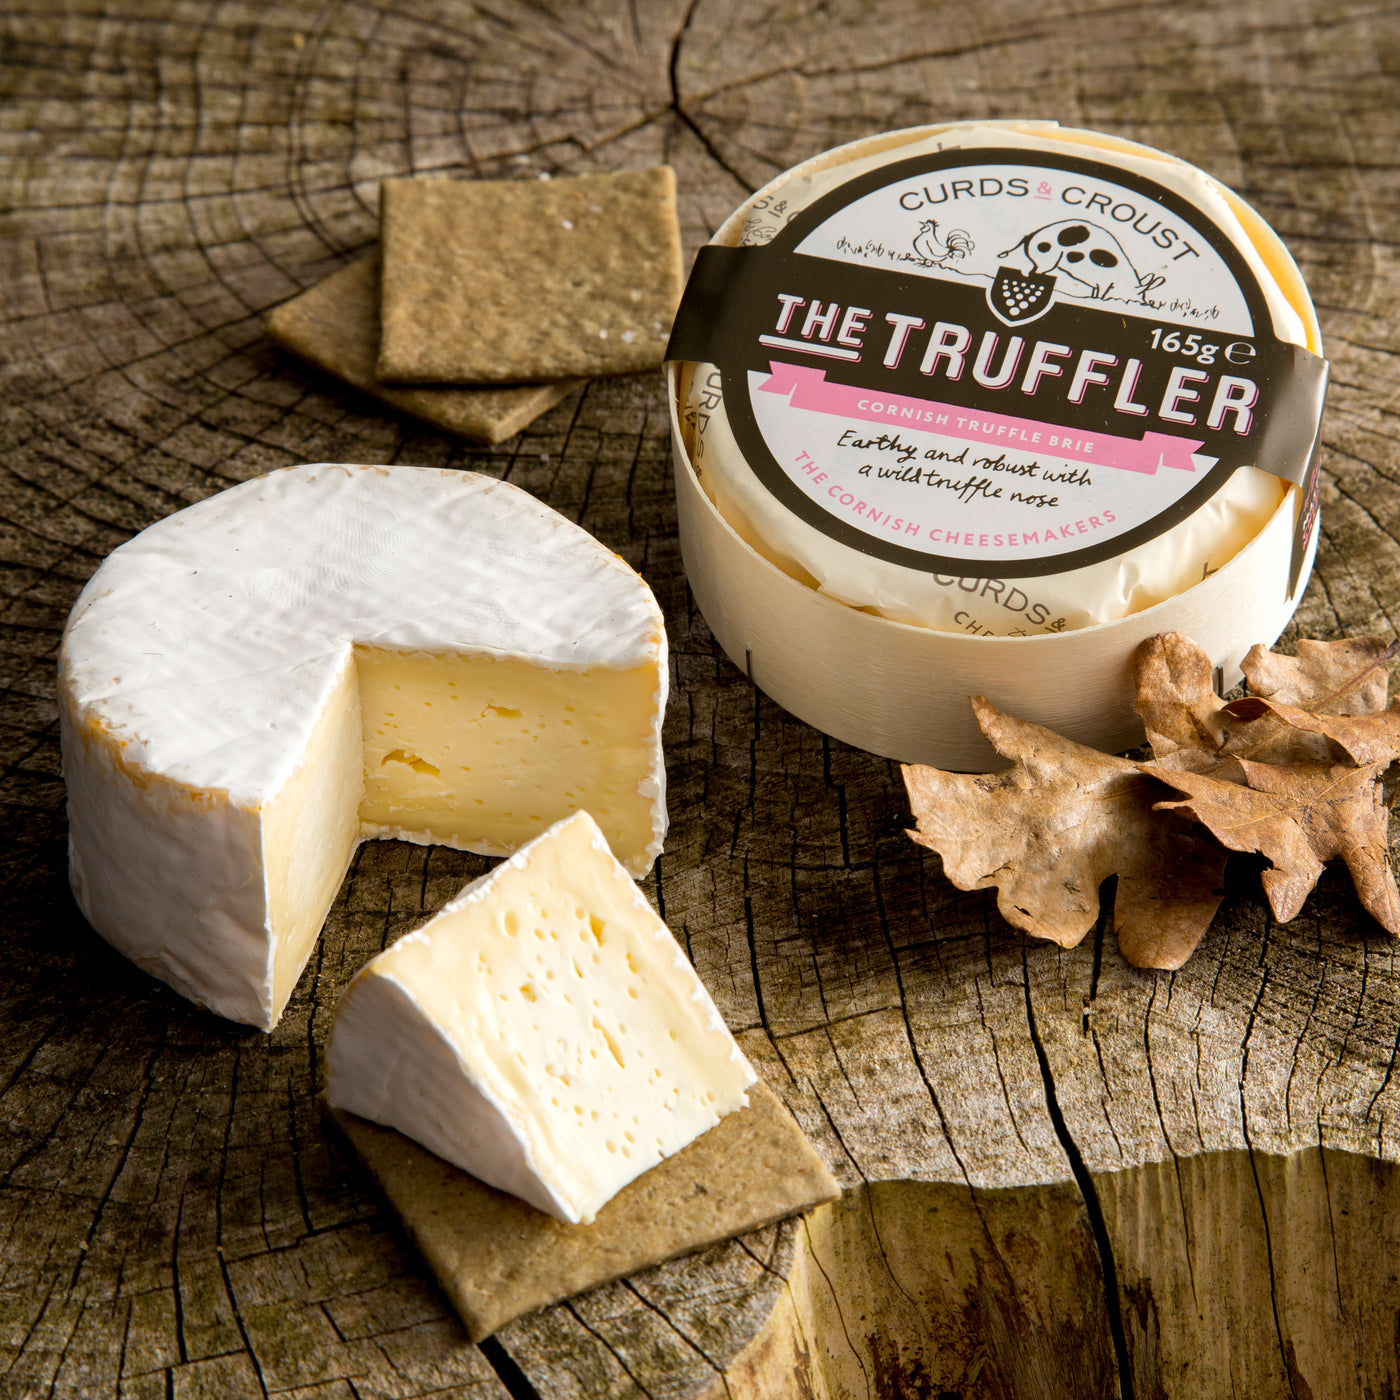 The Truffler - Curds and Croust Cheese - The Cheese Market 